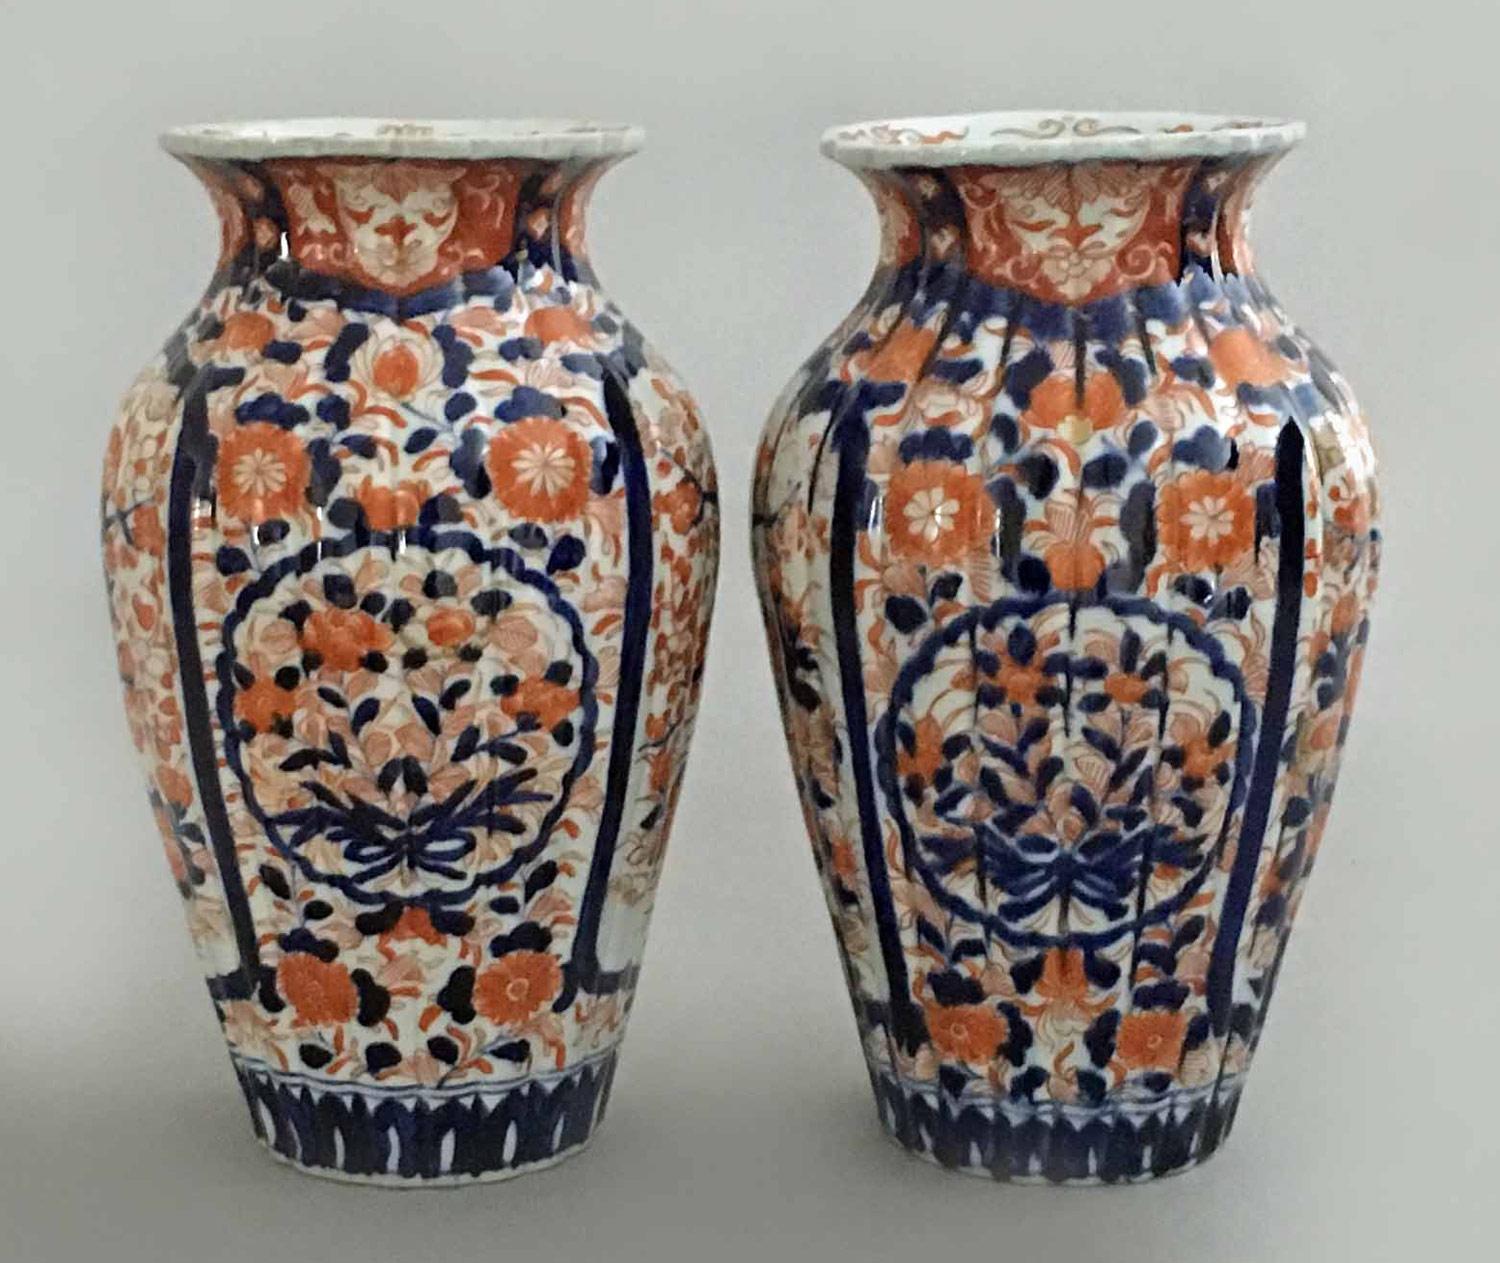 Pair of Japanese Imari Porcelain open vases of baluster form with short flared neck, ribbed bodies and scalloped rims, decorated with opposing shaped panels enclosing flower heads and branches in underglaze blue and iron red.